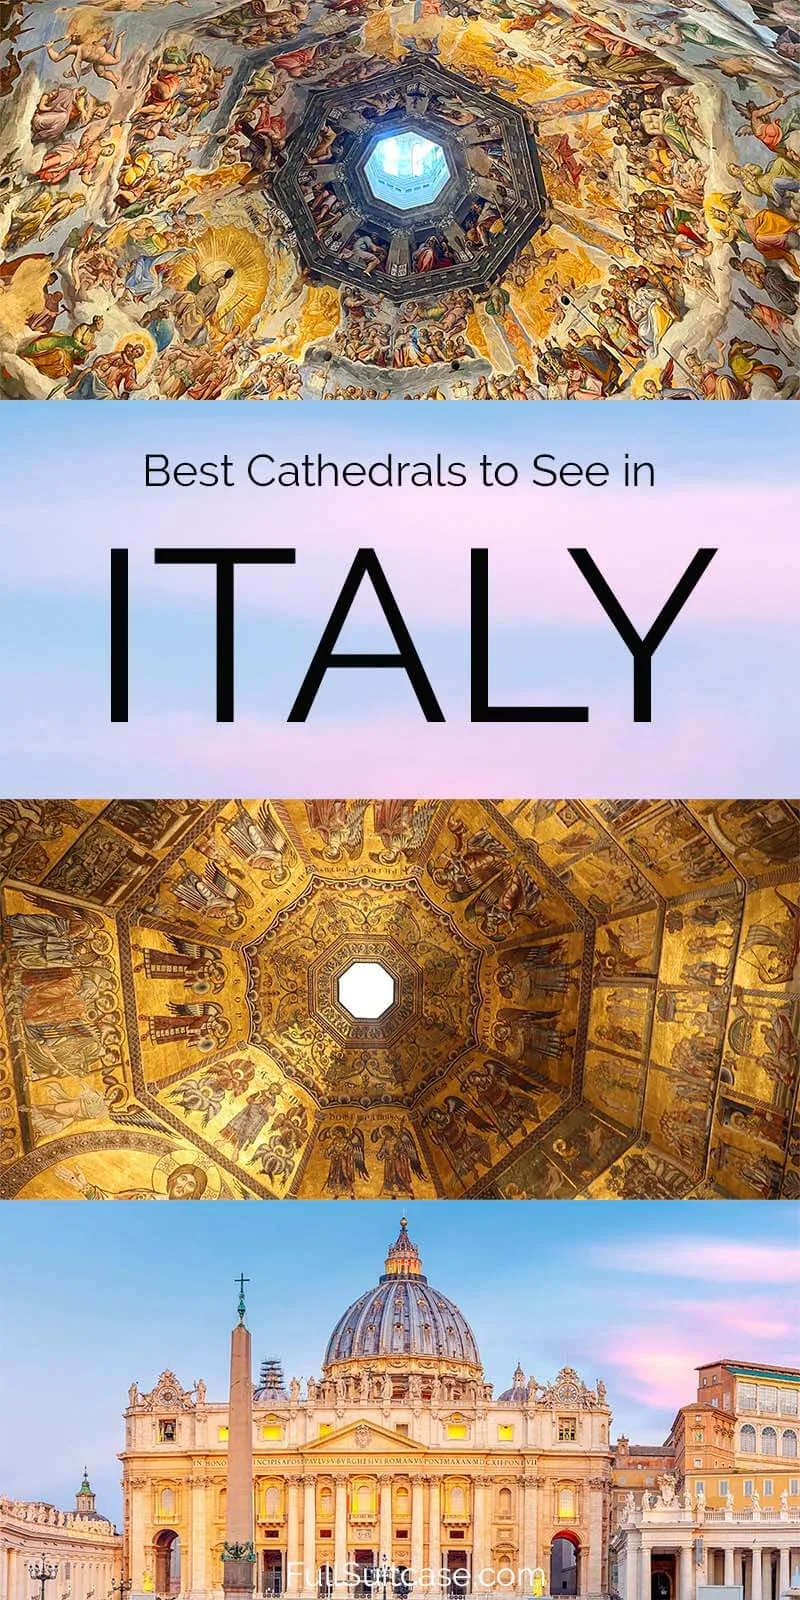 Best Churches and Duomo Cathedrals in Italy